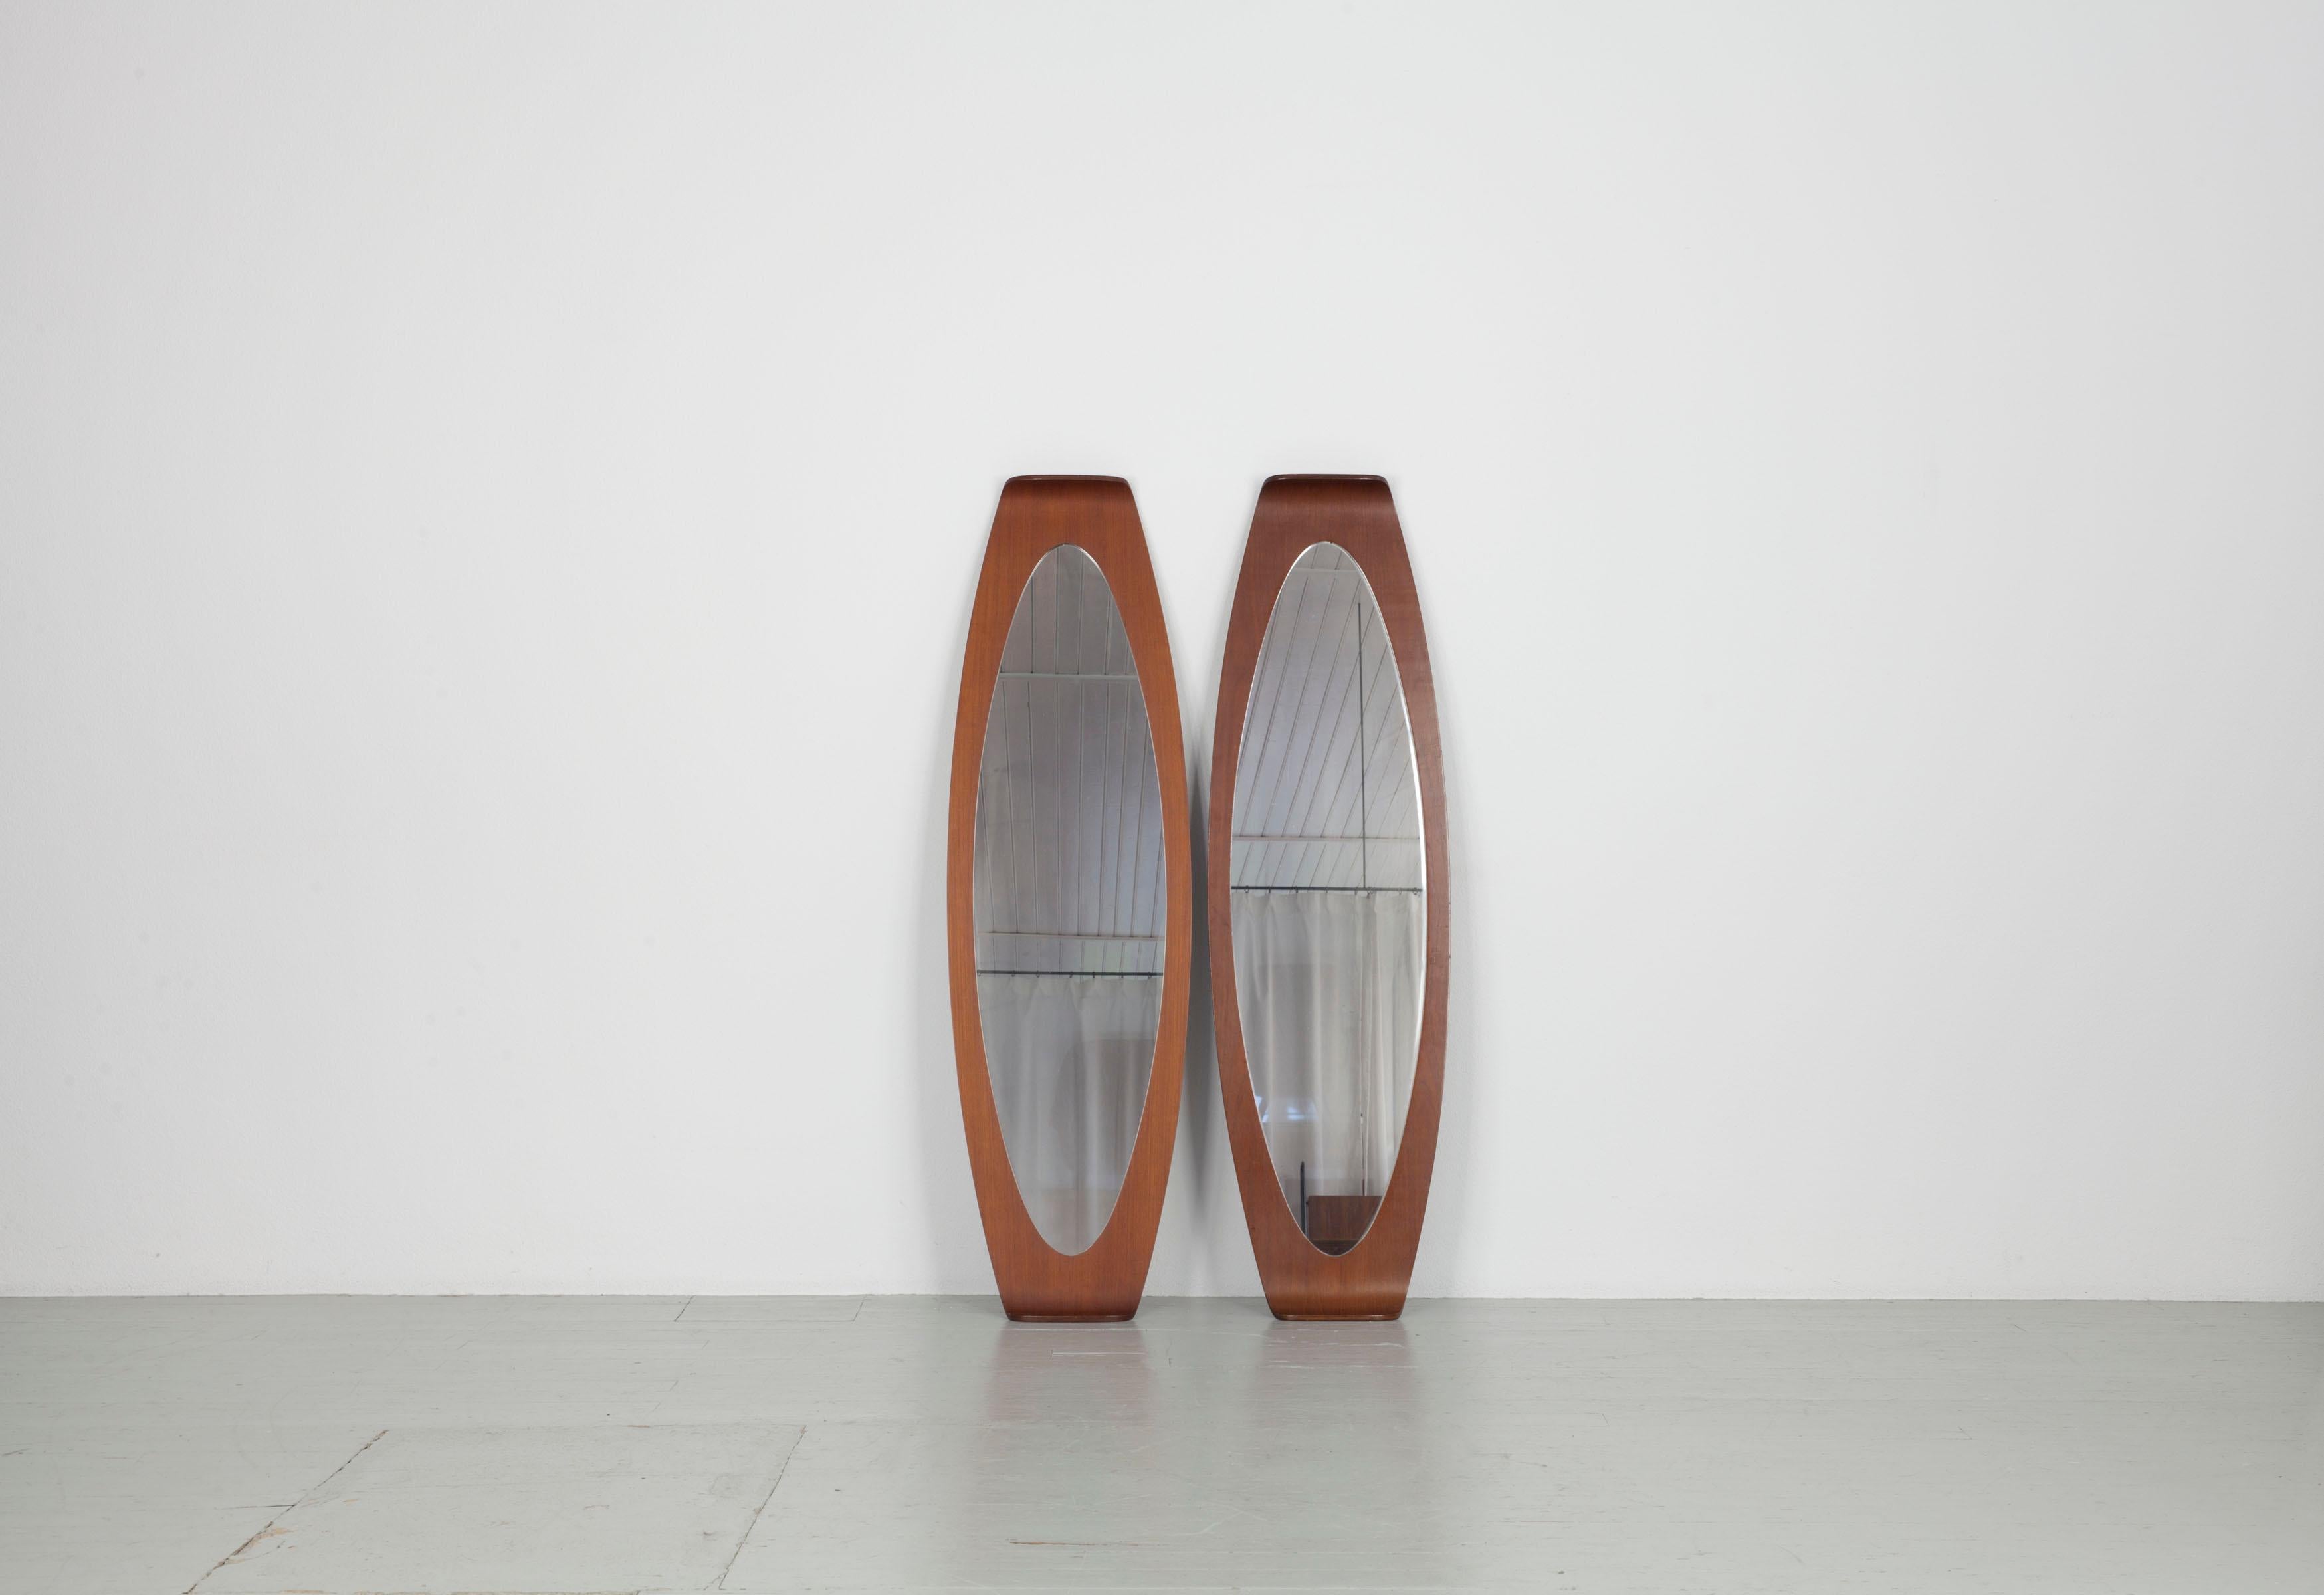 This Italian elongated-oval mirror set dates back to the 1960s. The set was designed by Franco Campo and Carlo Graffi. The two mirrors have a very special shape, the oval length of the teak is curved at both ends, which makes the mirrors look very